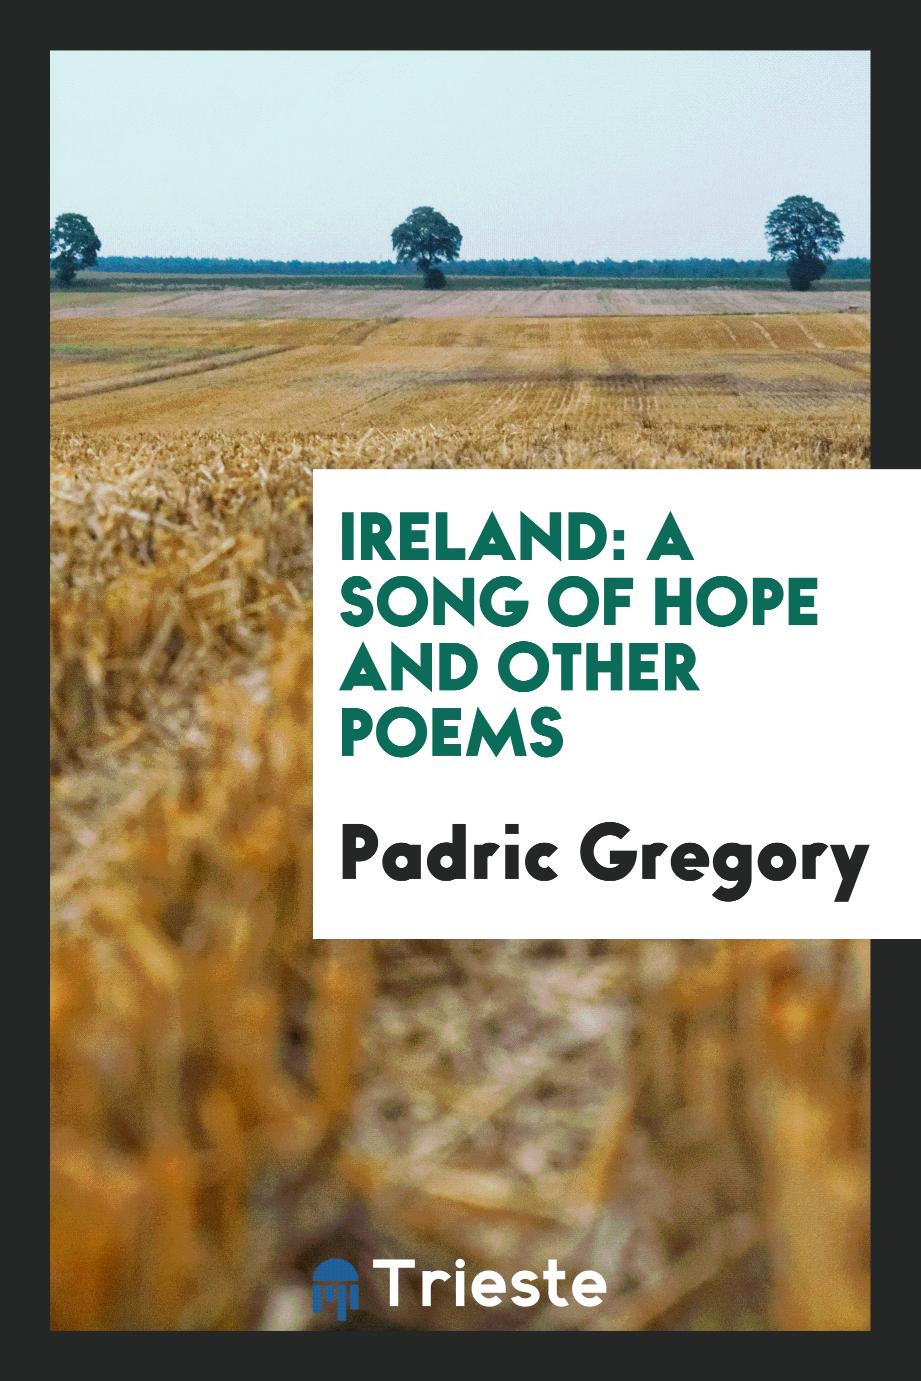 Ireland: A Song of Hope and Other Poems